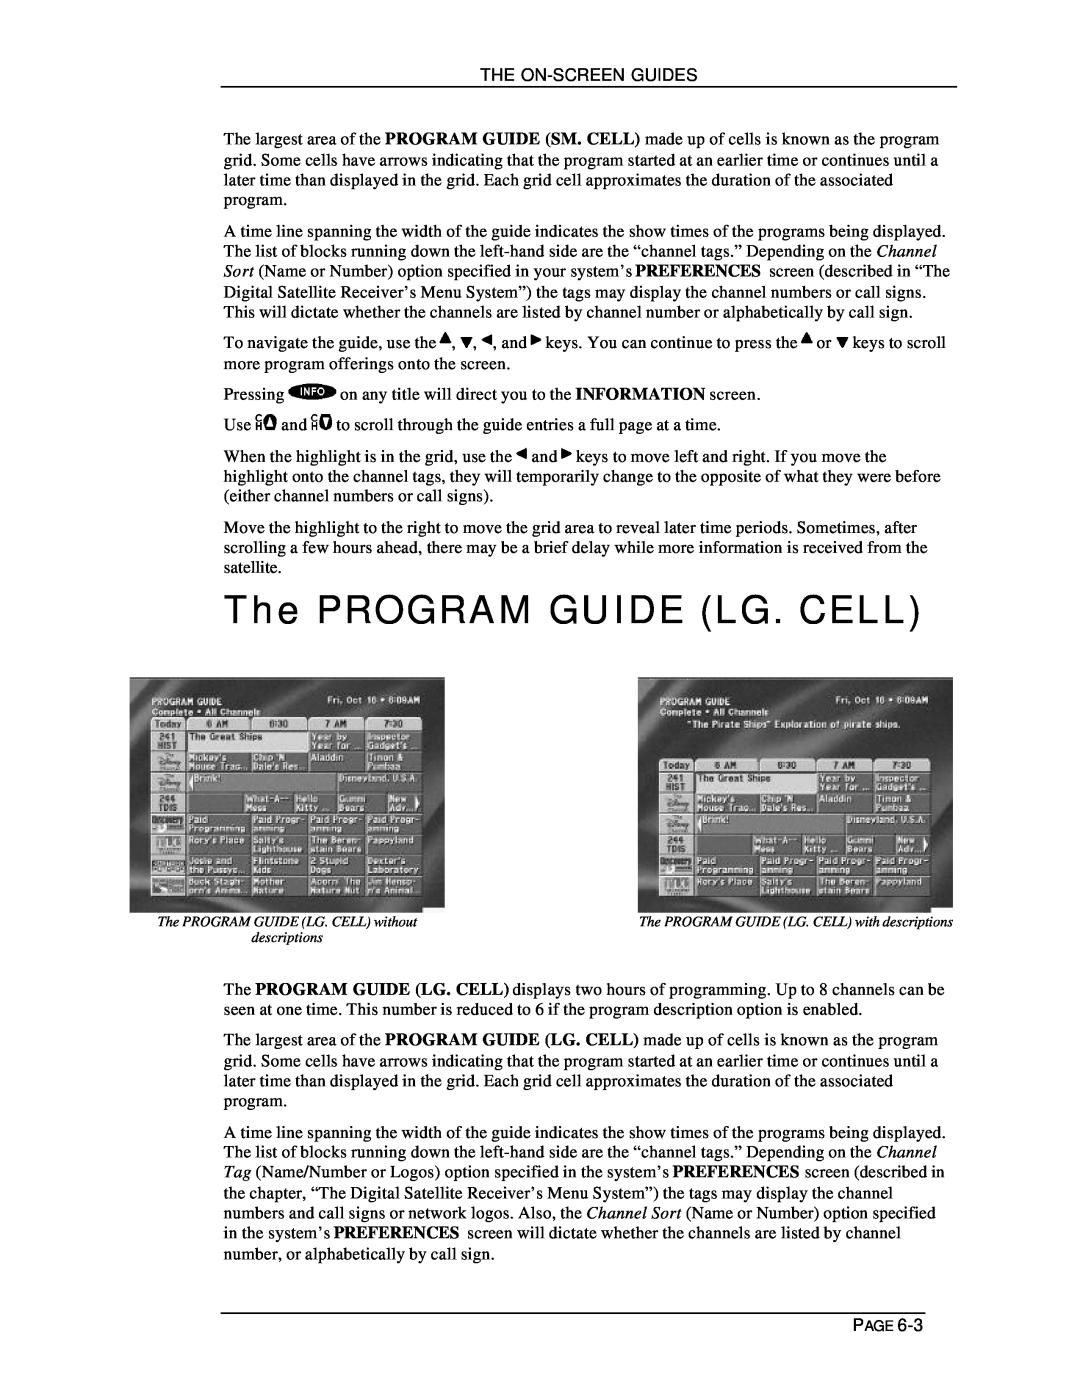 DirecTV HIRD-D11, HIRD-D01 owner manual The PROGRAM GUIDE LG. CELL, The On-Screenguides, Page 